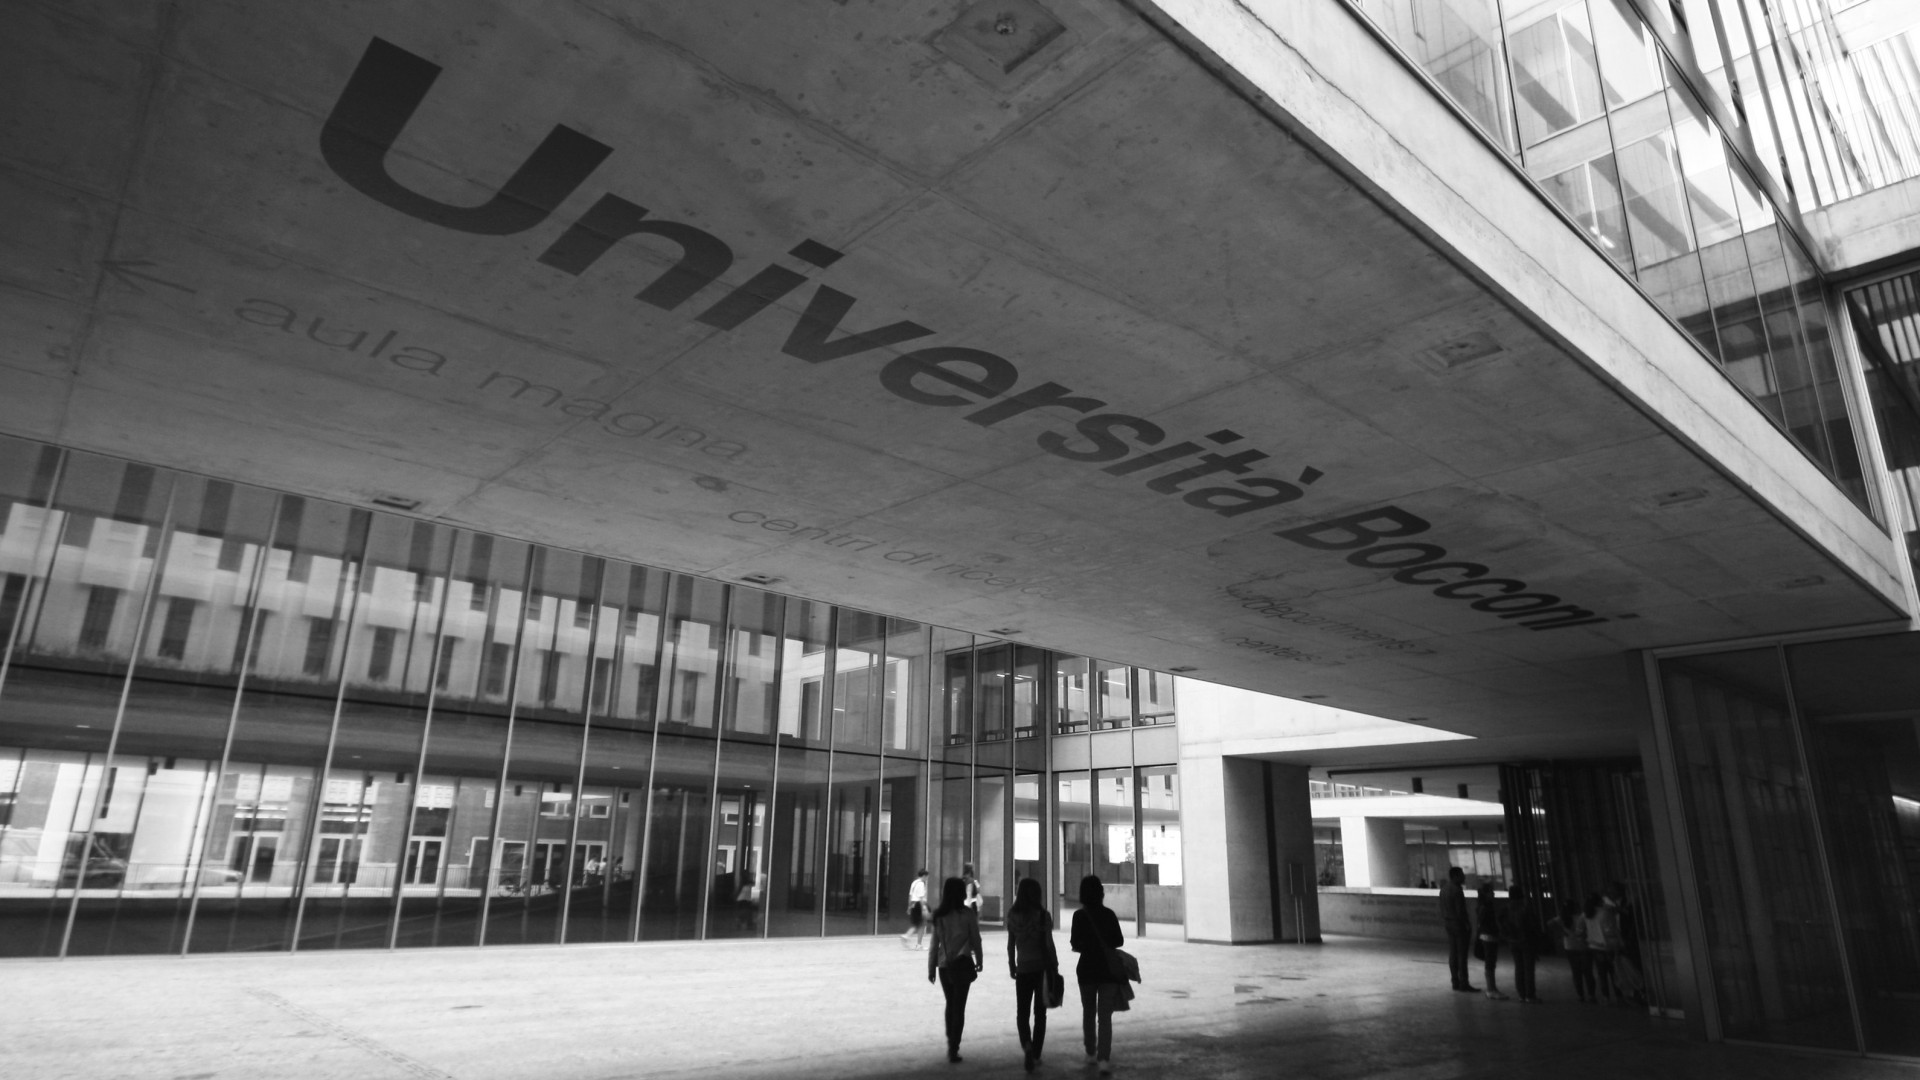 Female students, future ruling class, will be able to attend Bocconi thanks to OTB